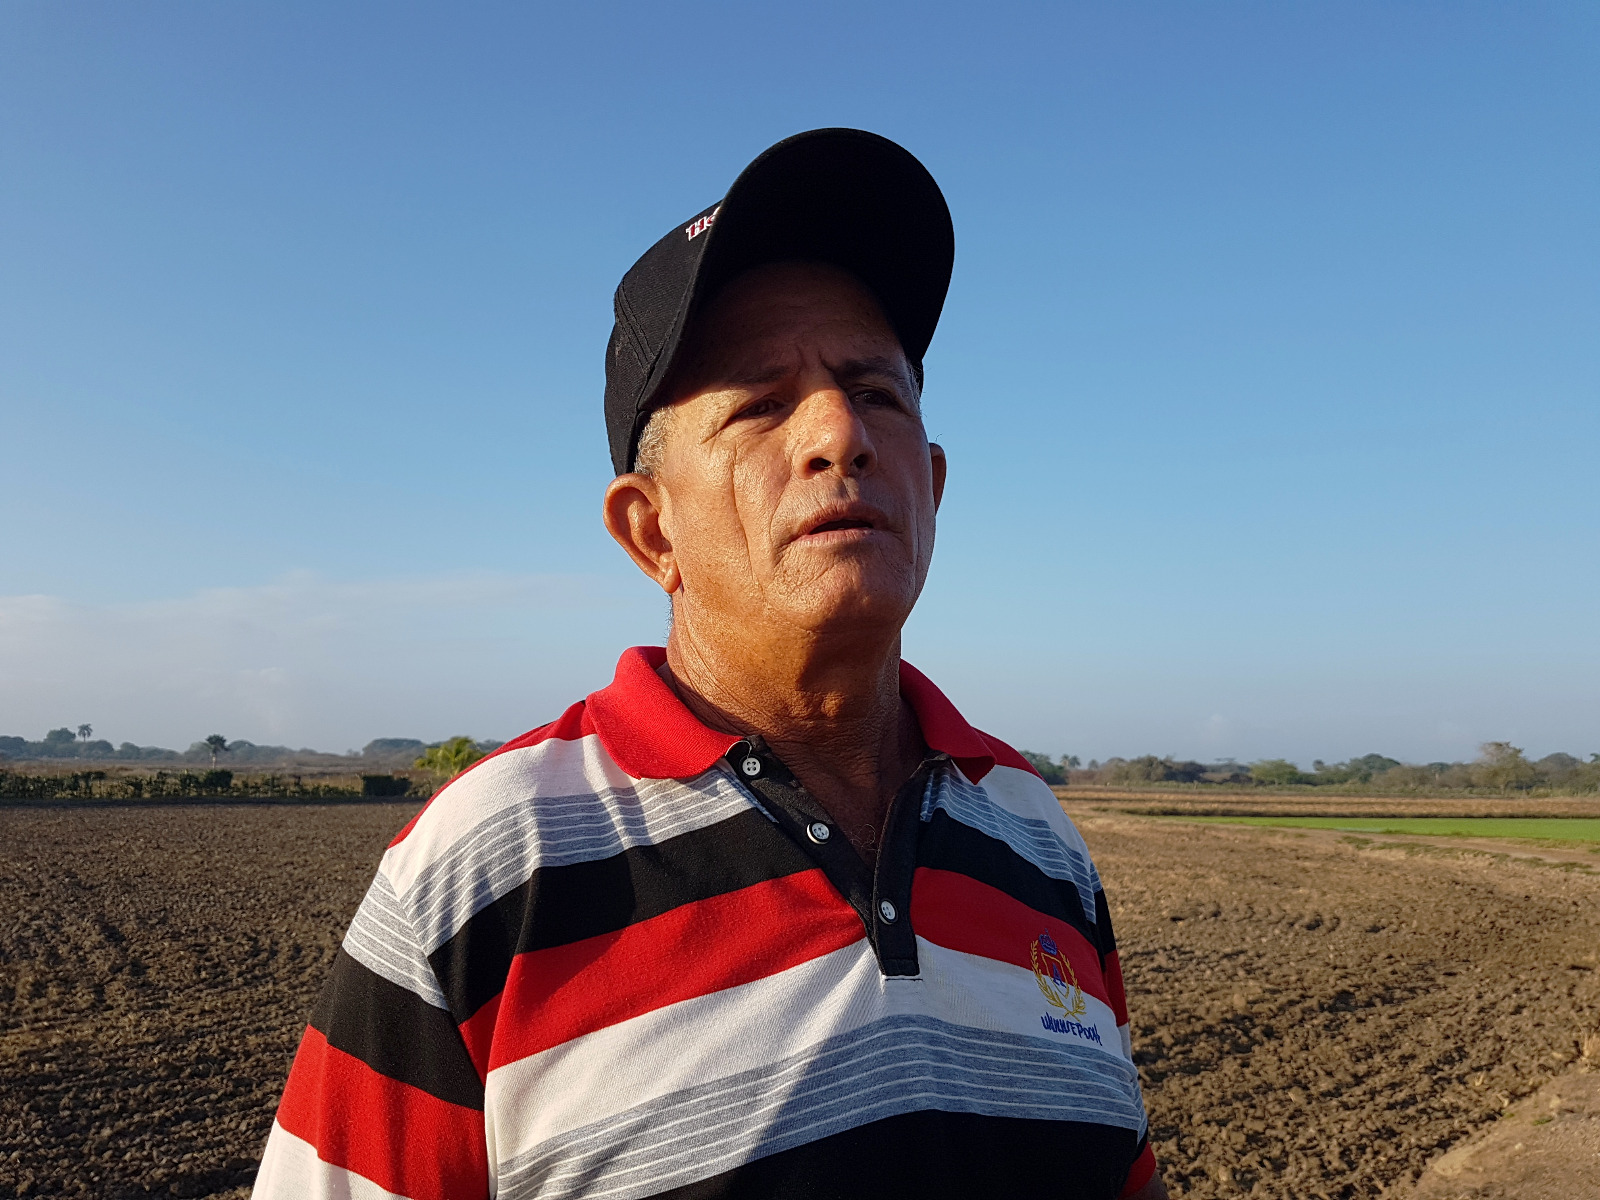 Titi Puerta, a rice farmer from Camagüey with results to multiply (+ Audio)